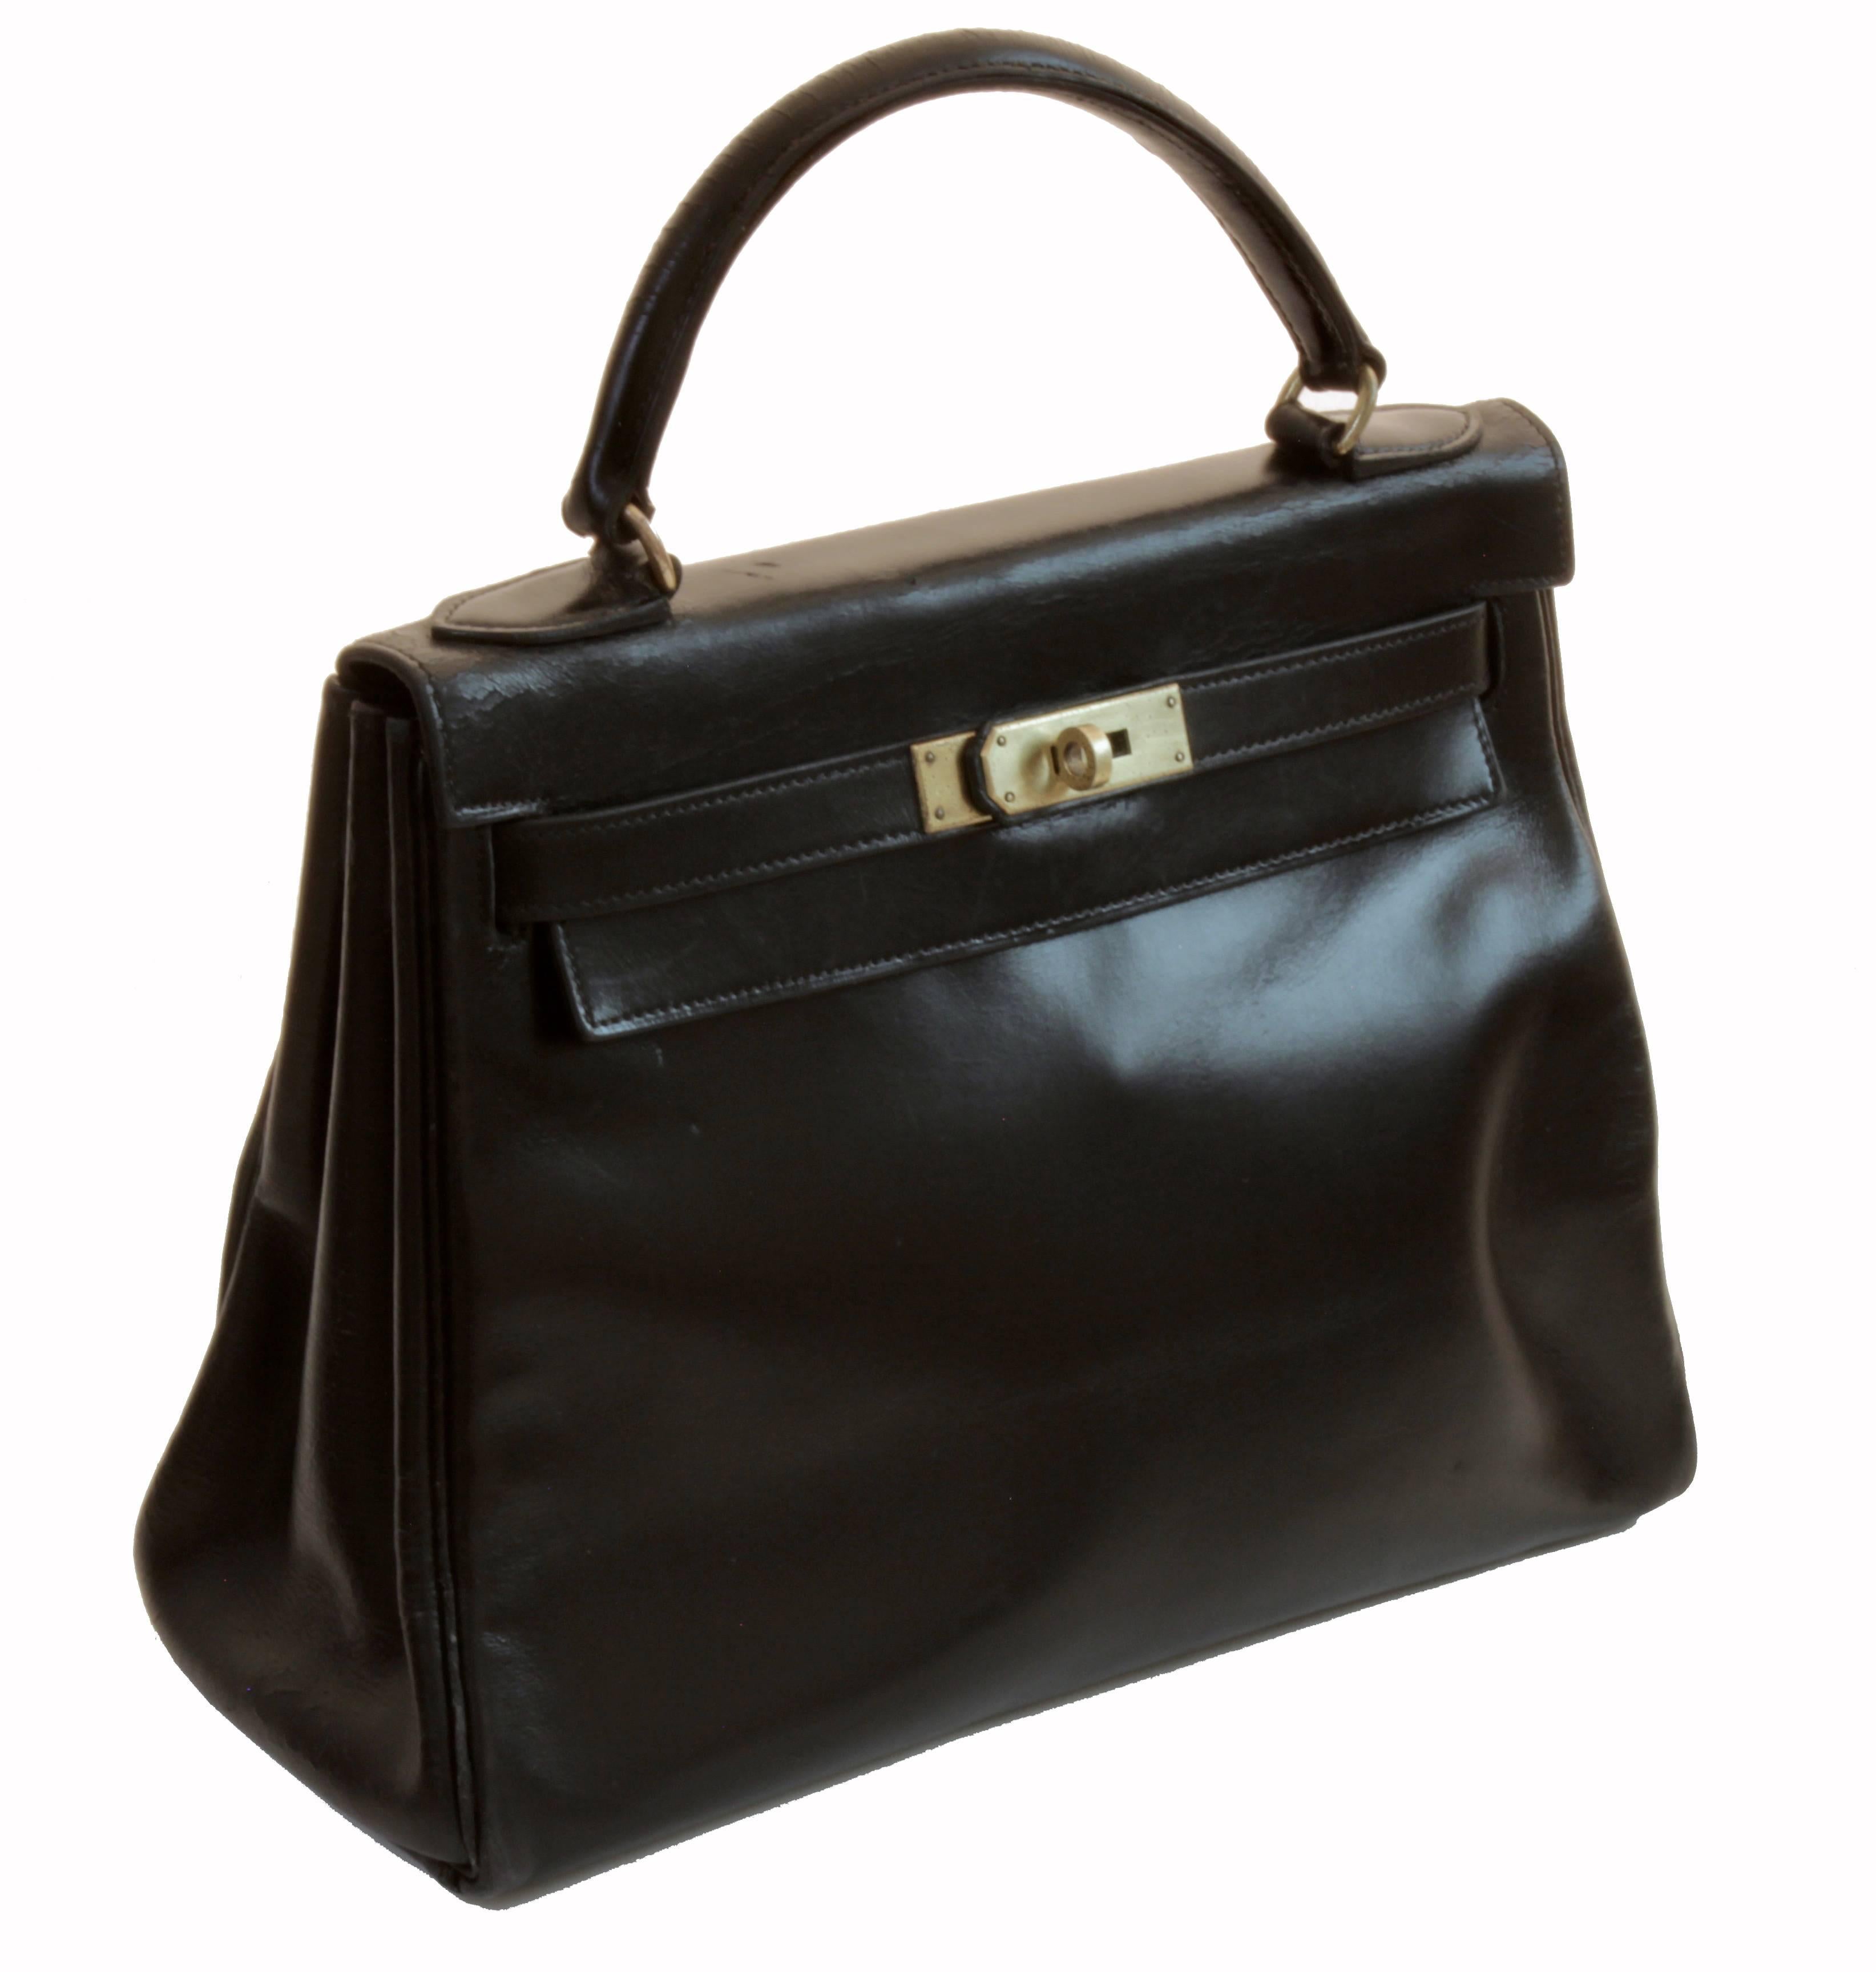 This iconic top handle bag was made by Hermes in 1948, years before Grace Kelly made the bag famous, prompting Hermes to eventually rename it The Kelly Bag.  Made from black box leather with gold tone hardware, this is the 28cm version and measures